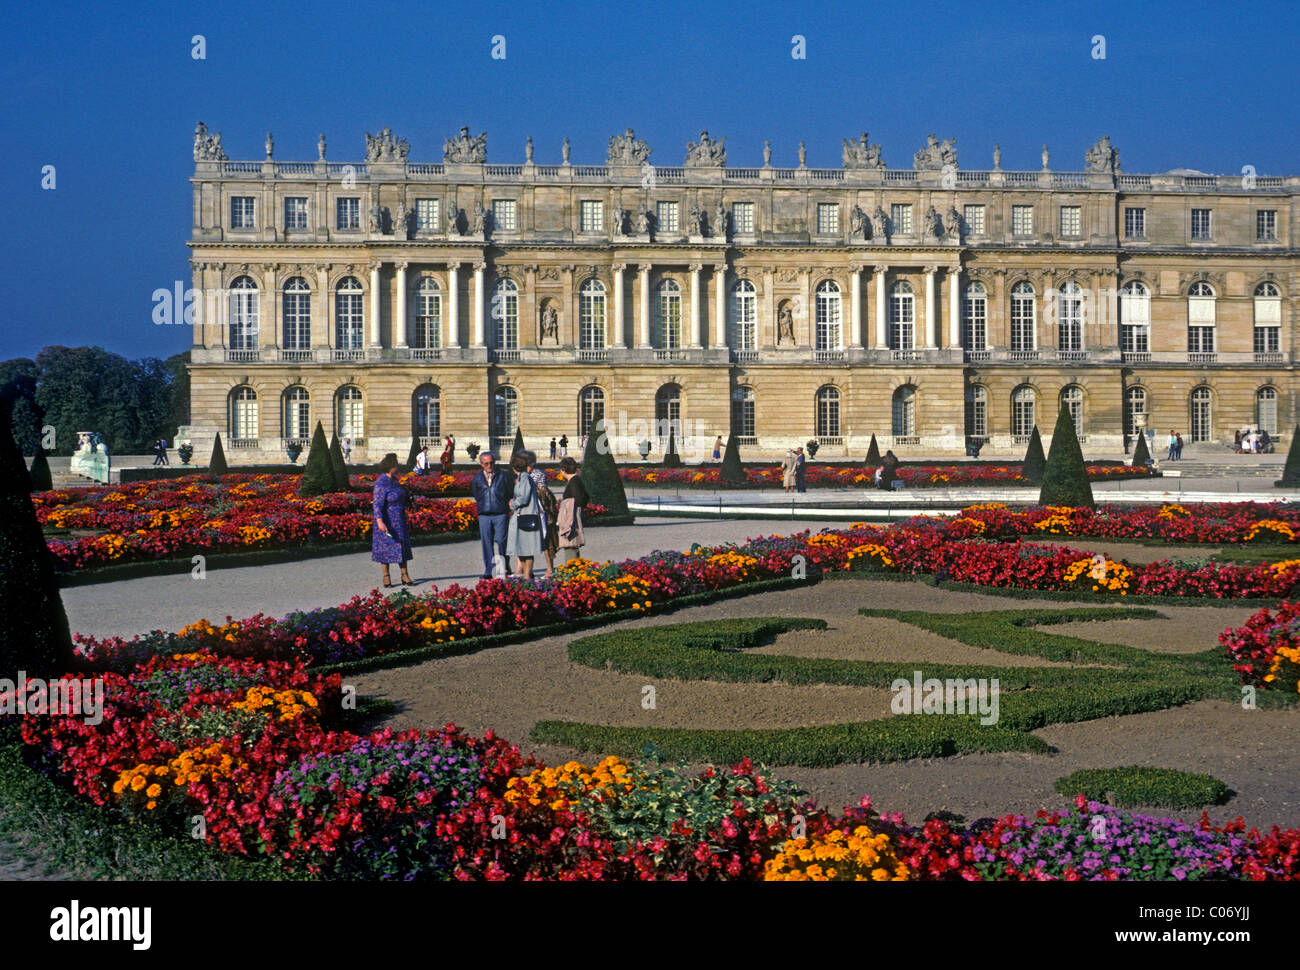 Formal gardens, Palace of Versailles, city of Versailles, Ile-de-France region, France, Europe Stock Photo